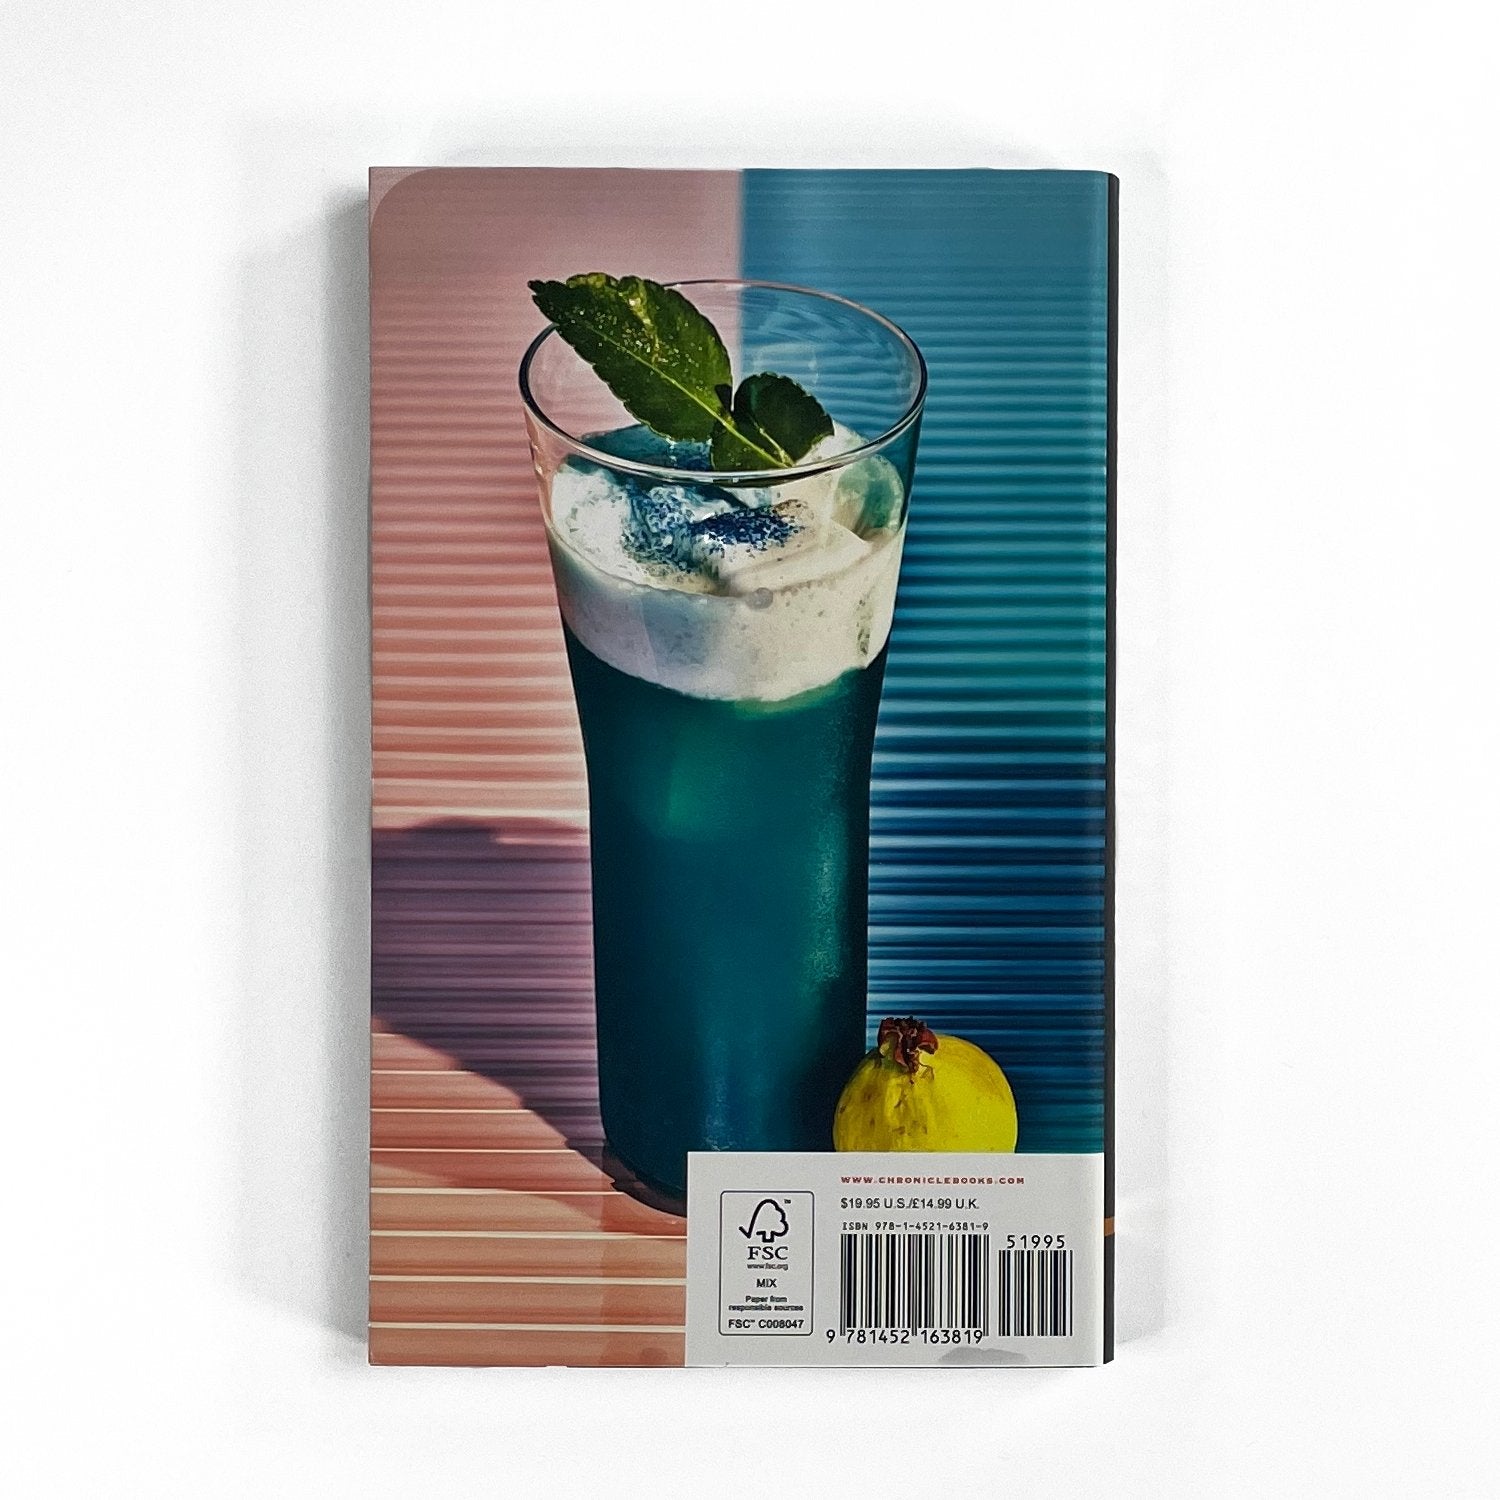 Back cover of "Clean + Dirty Drinking: Recipes for Drinks with or without Booze"